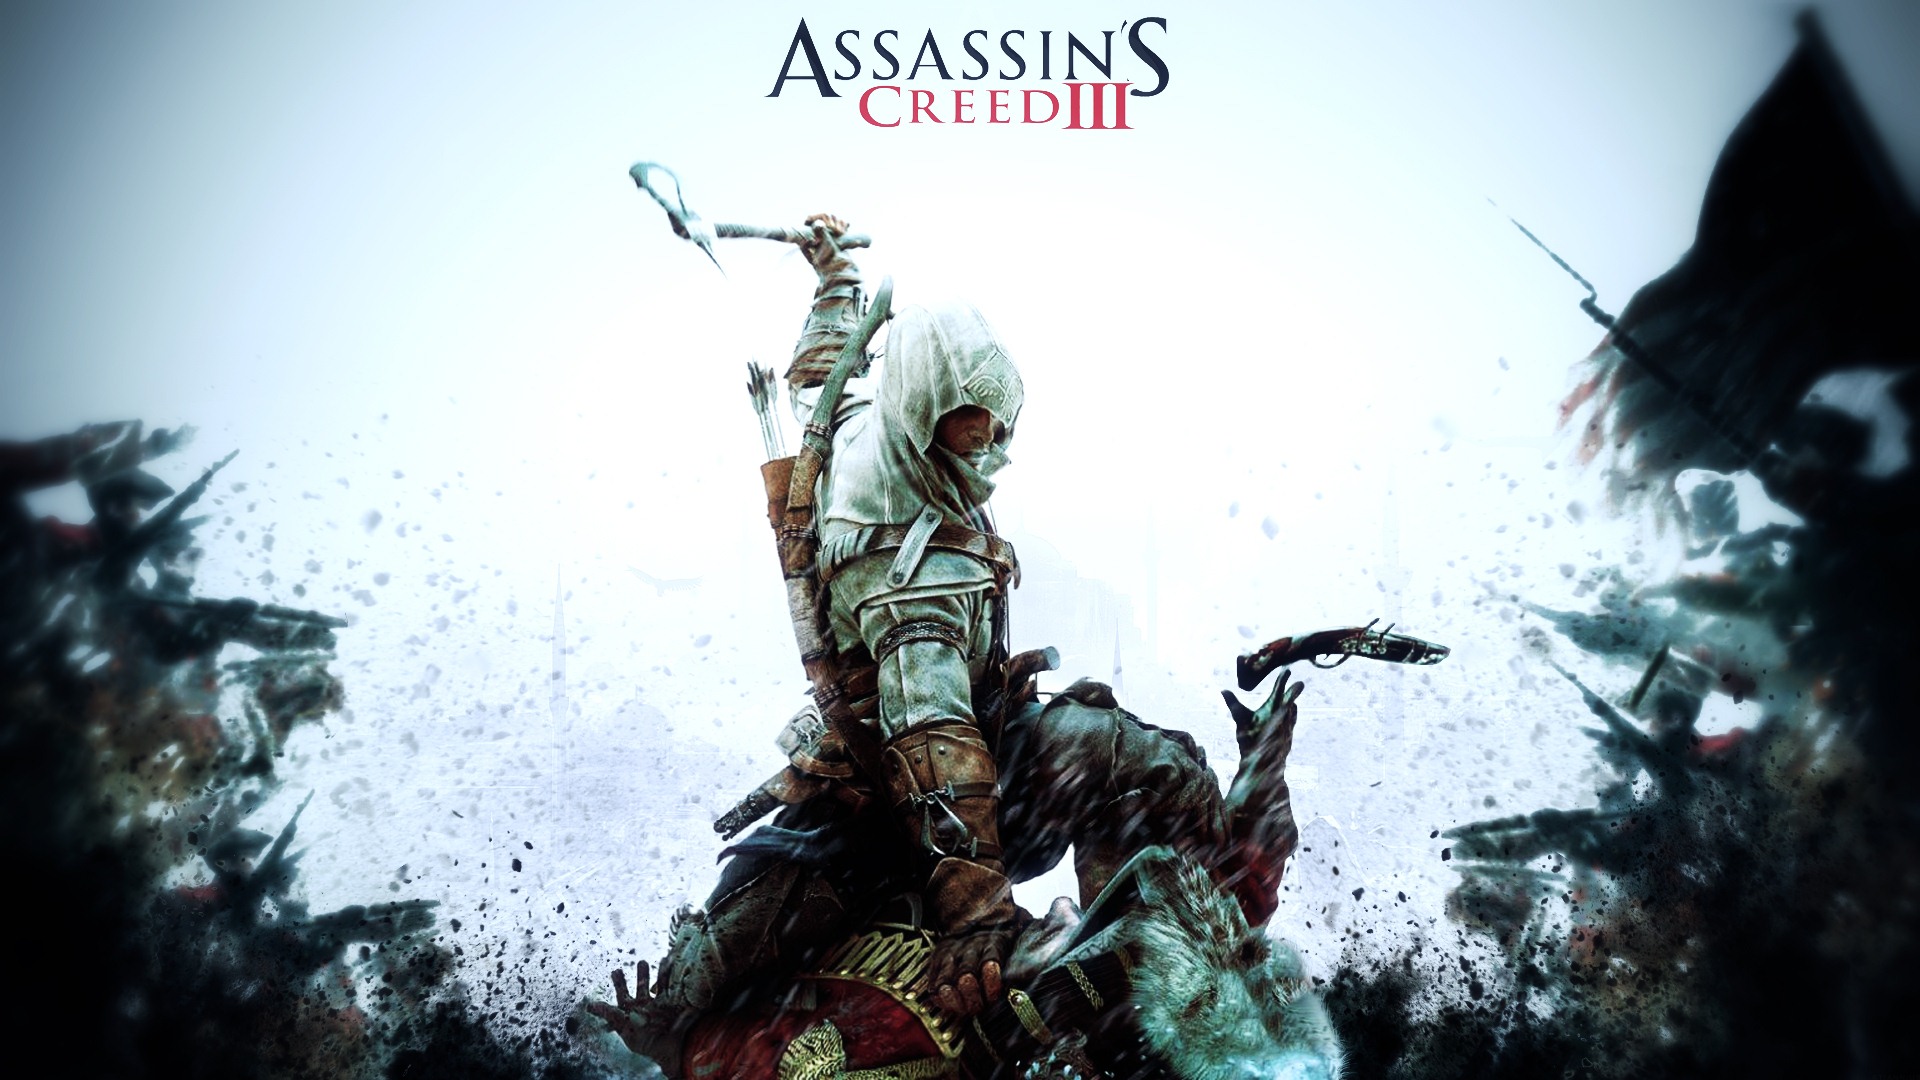 Assassin's Creed 3 HD wallpapers #15 - 1920x1080